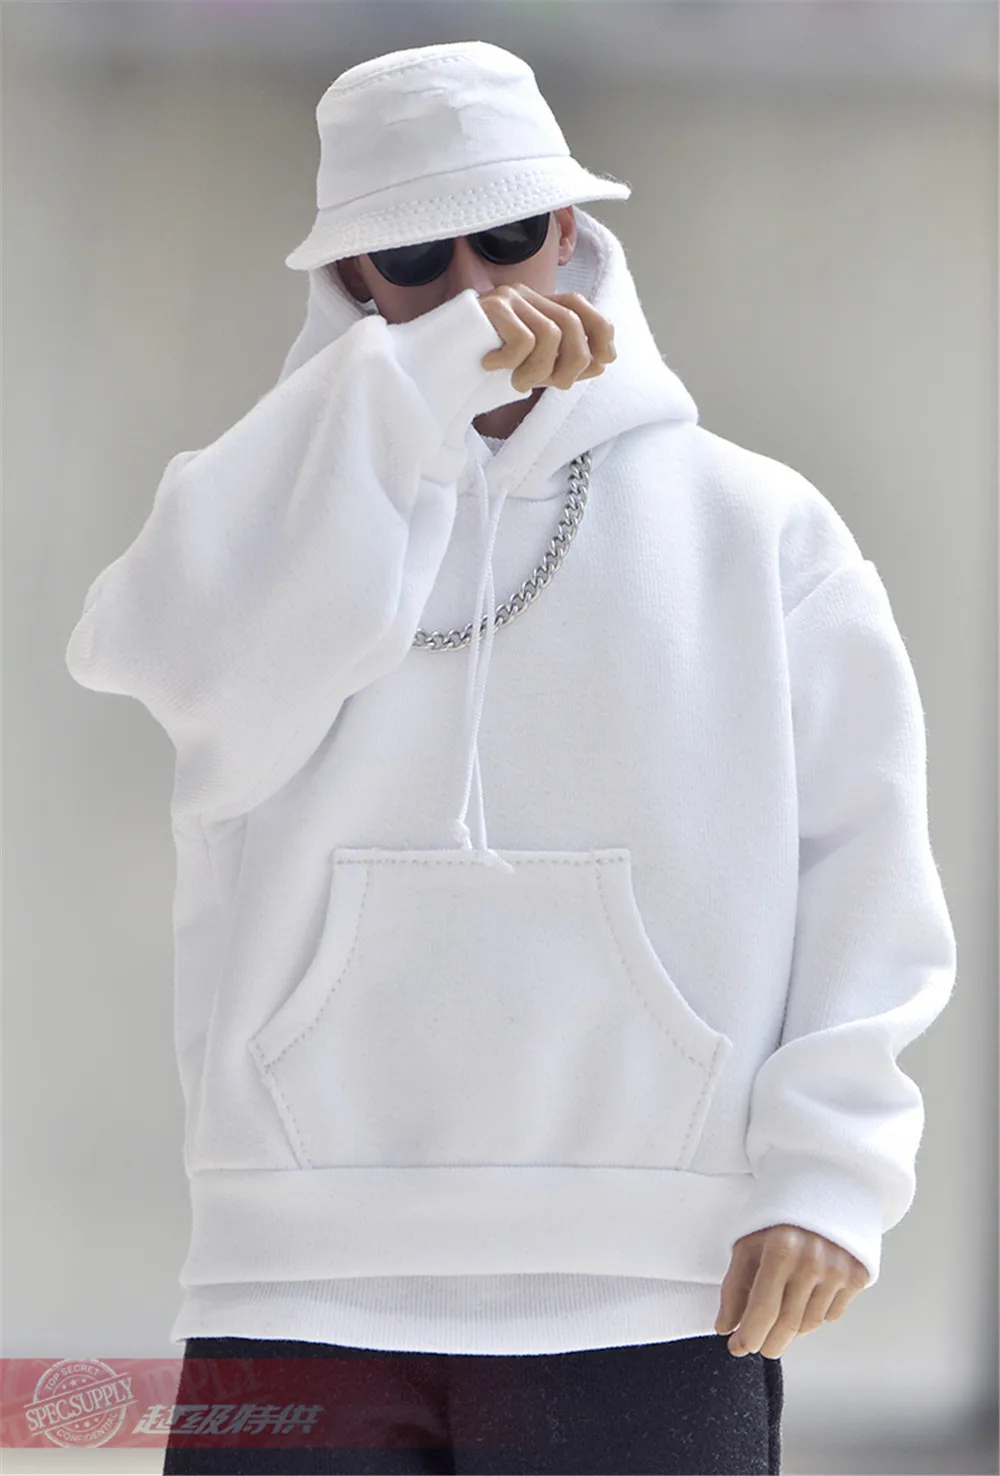 1/6 Action Figure Clothes Sweater Hoodie Fleeces Round Collar 1:6 Male 